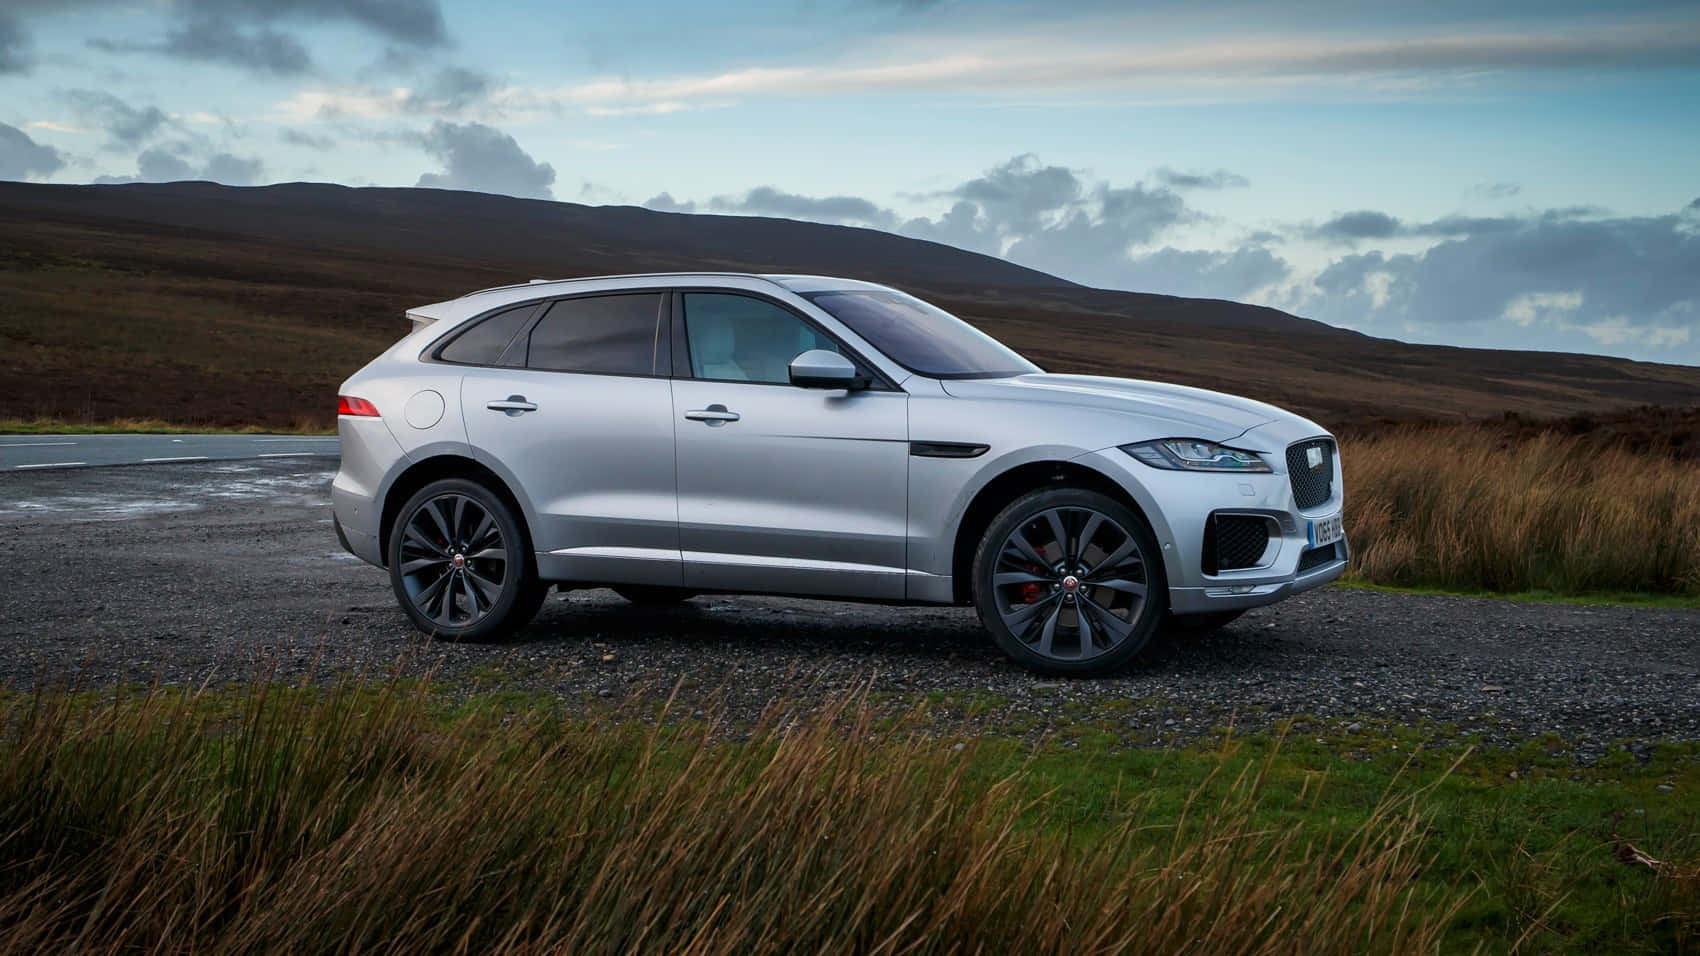 Caption: Majestic Jaguar F-pace Unleashed On A Country Road Wallpaper